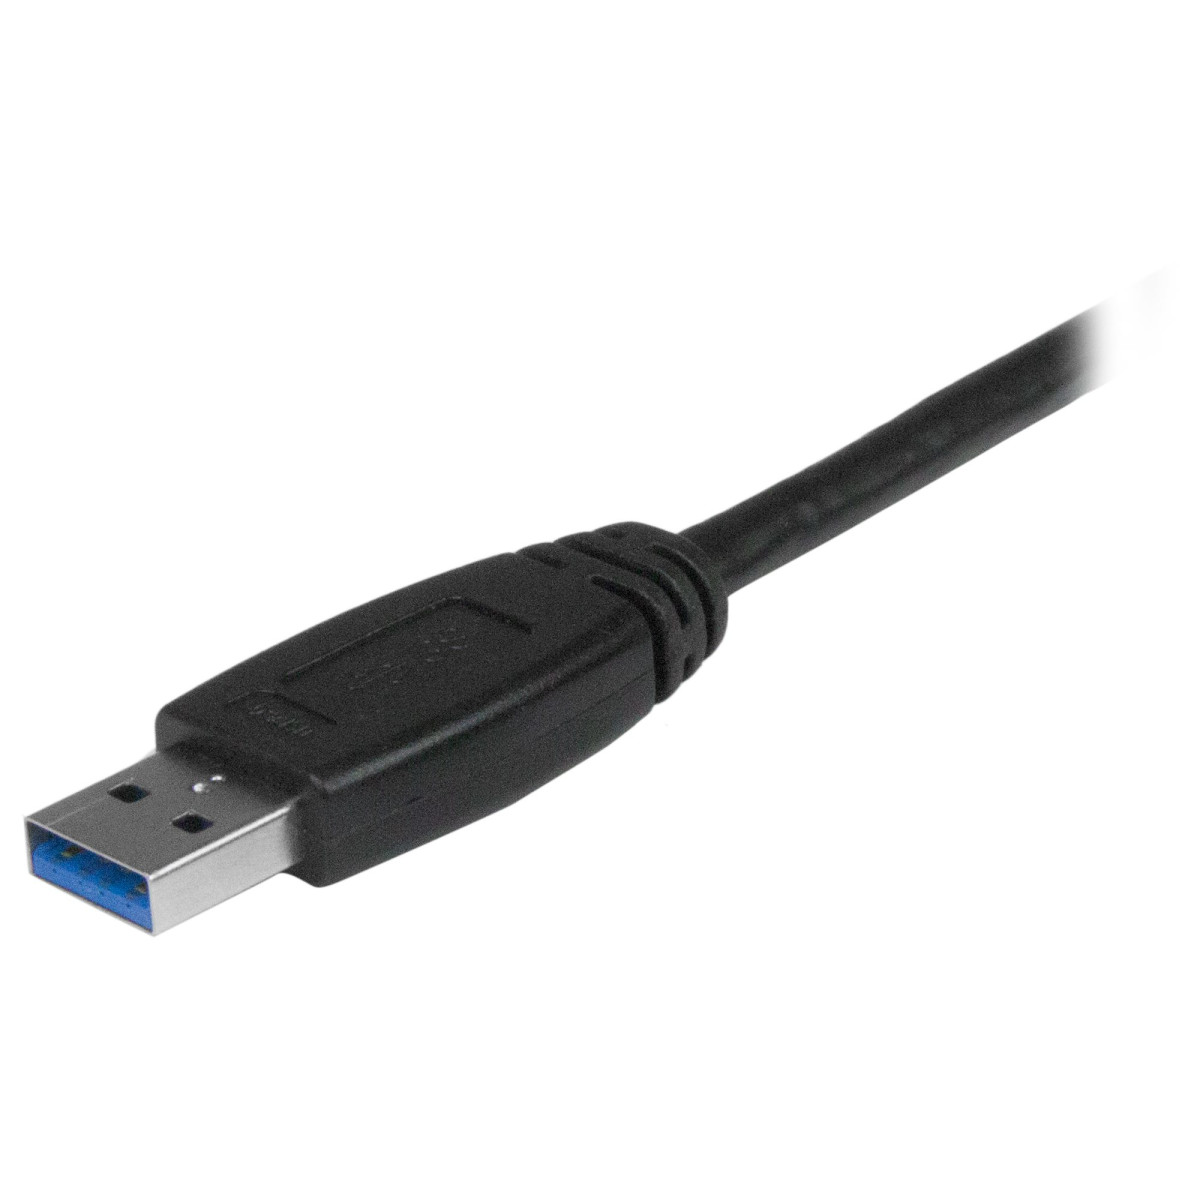 USB 3.0 Data Transfer Cable